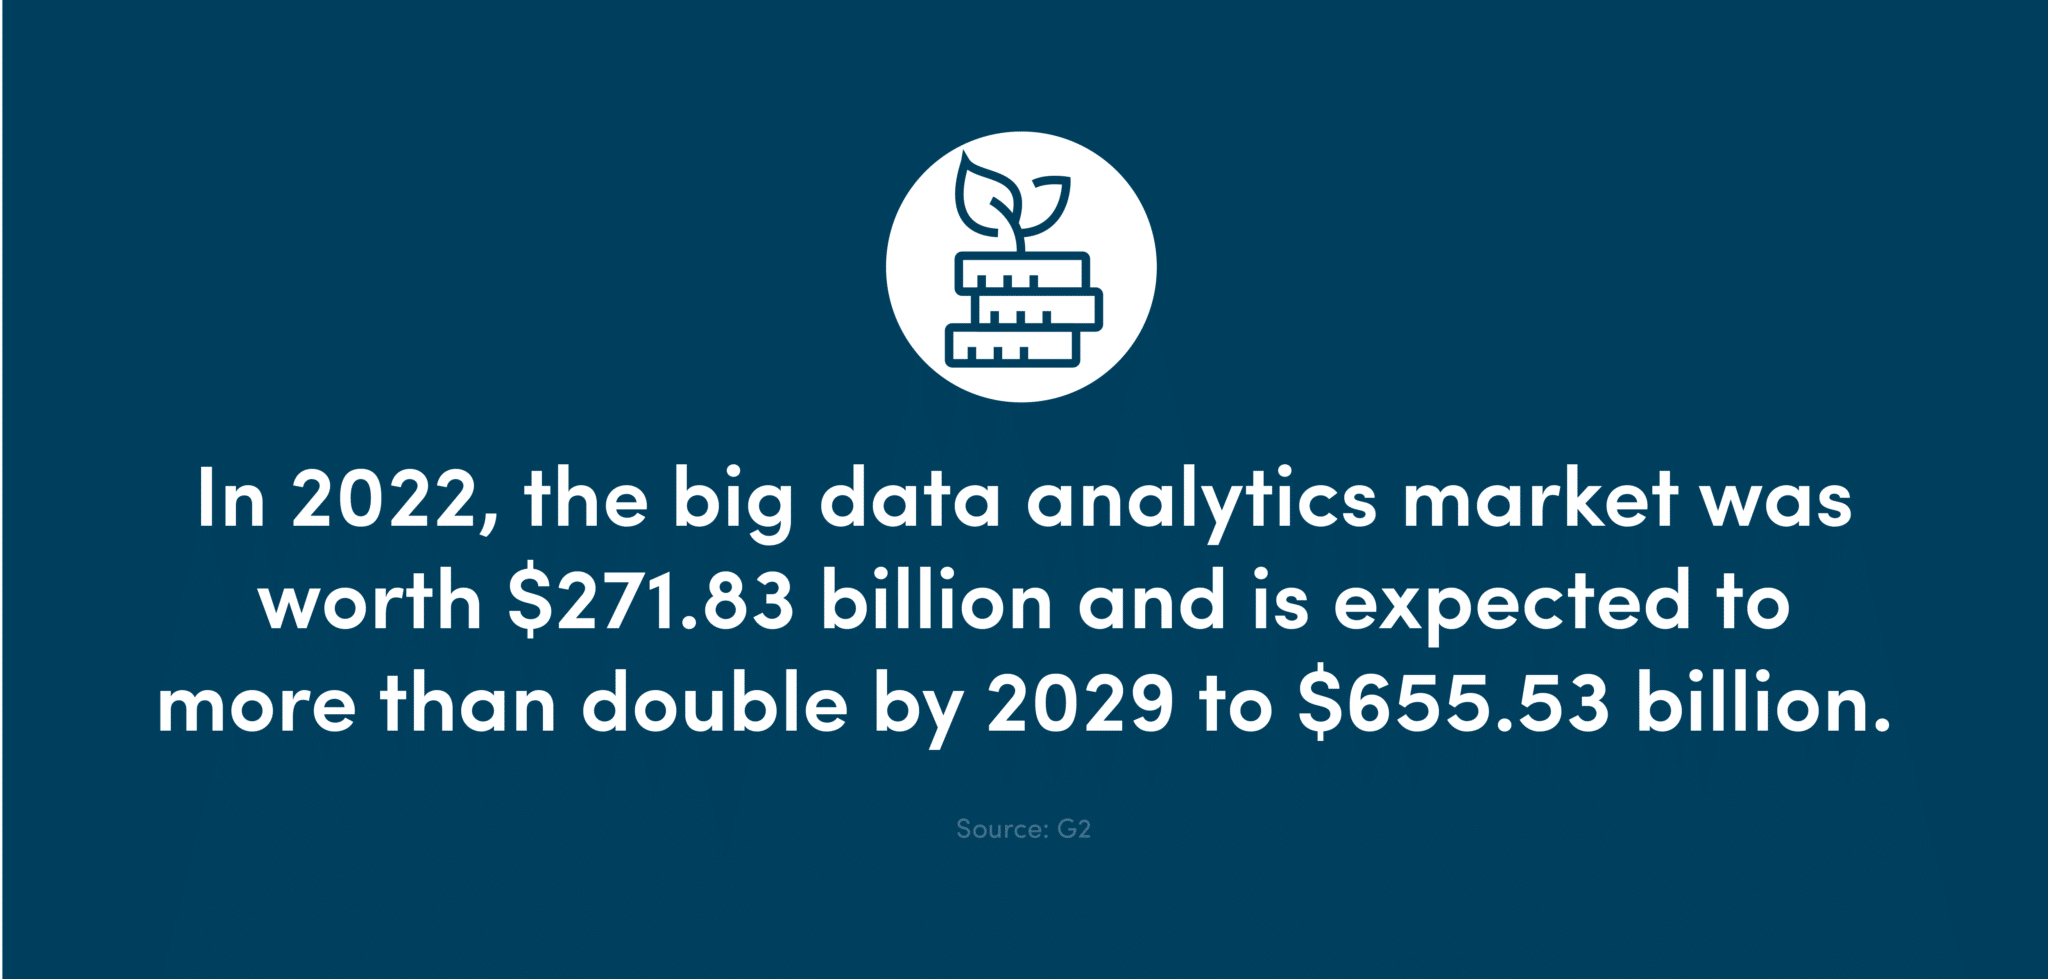 In 2022, the big data analytics market was worth $271.83 billion and is expected to more than double by 2029 to $655.53 billion.